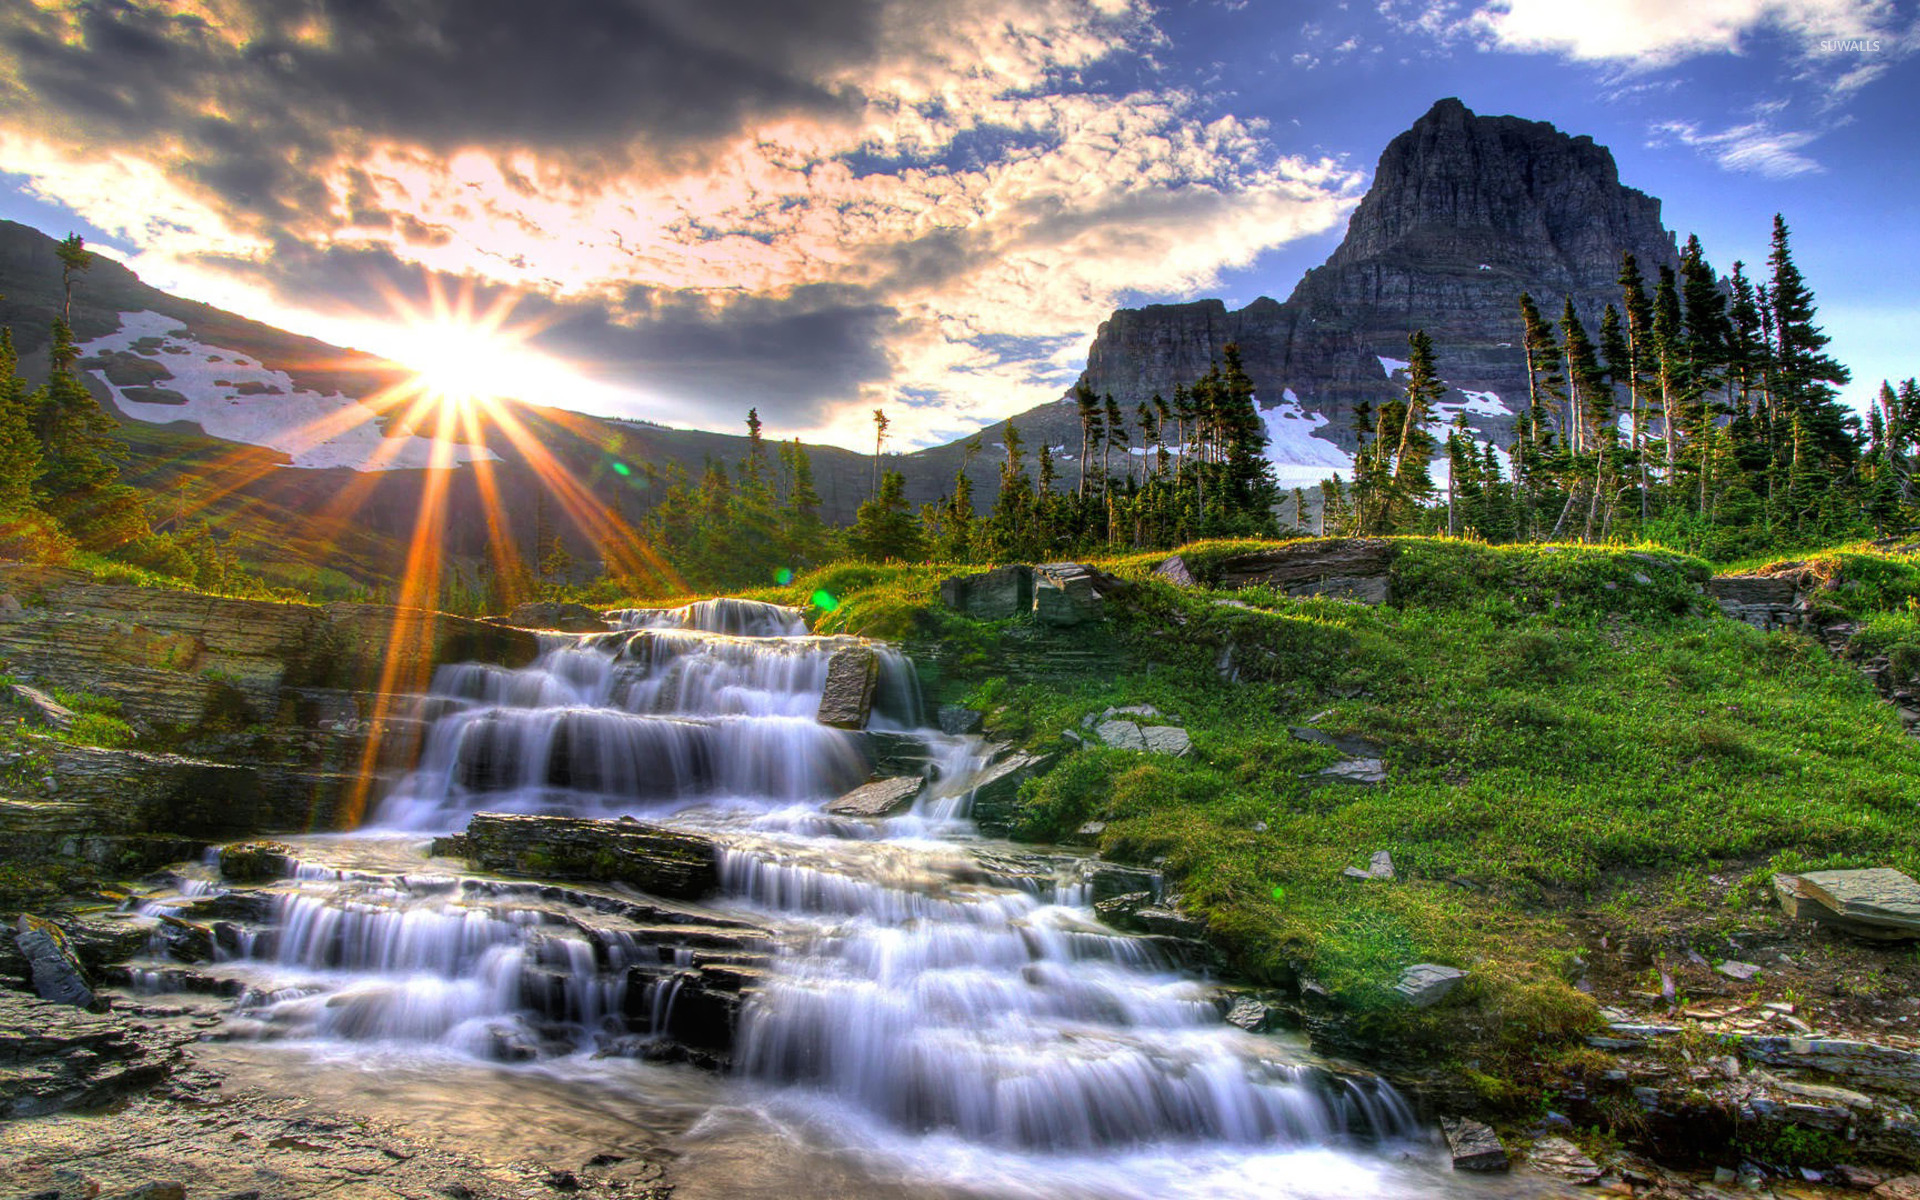 Sunrise Over The Mountains [2] Wallpaper - Nature Wallpapers - #14574